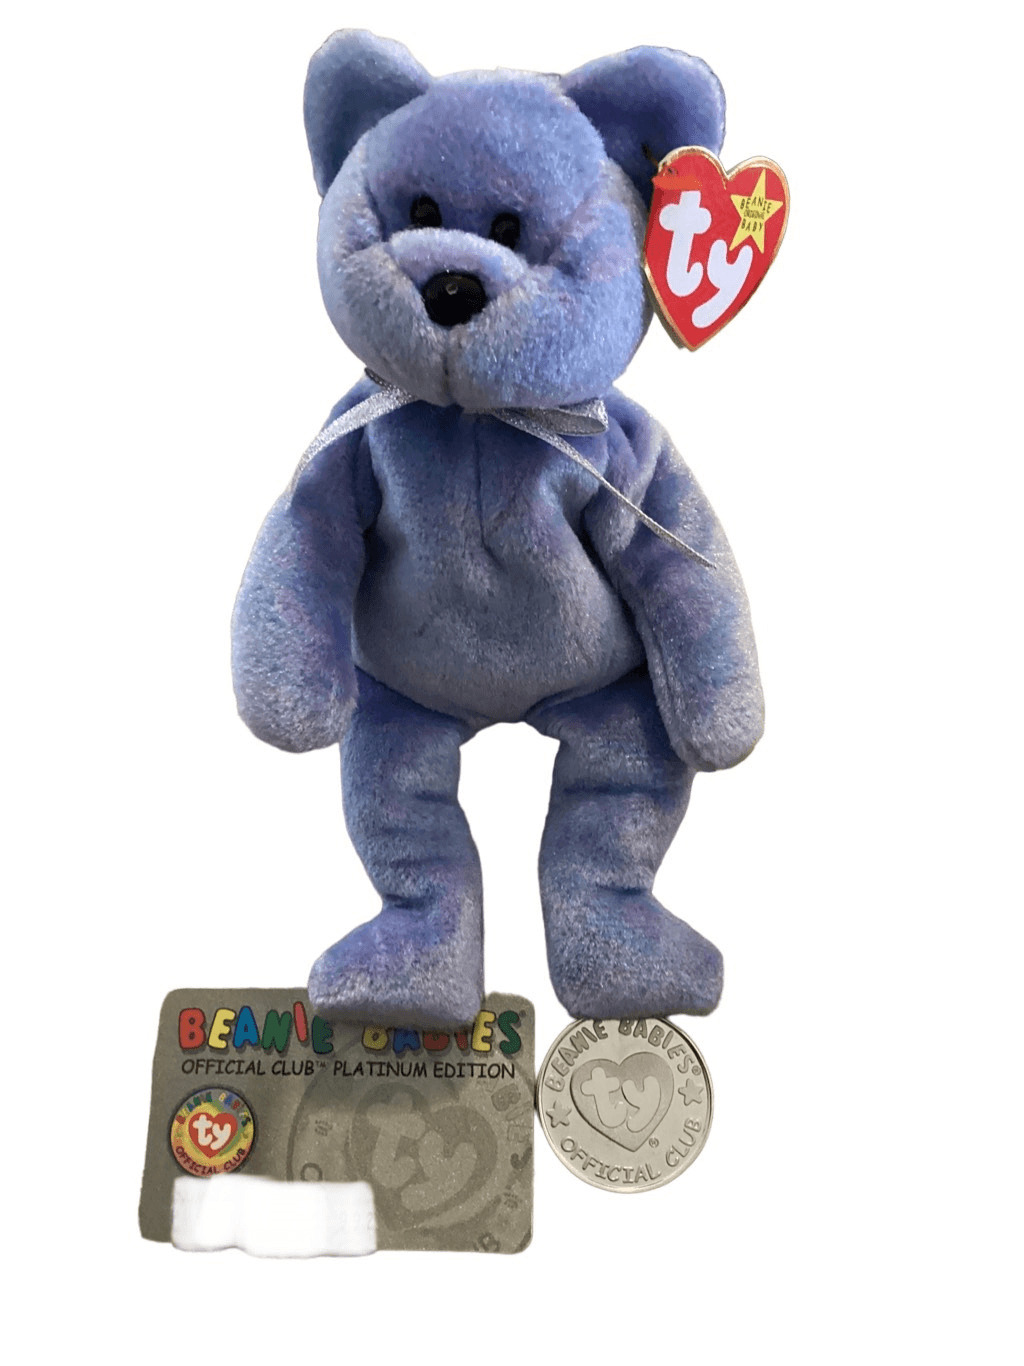 1999 Clubby 2 Bear Ty Beanie Baby Plush Collectible Tag Error Misspellings Medal